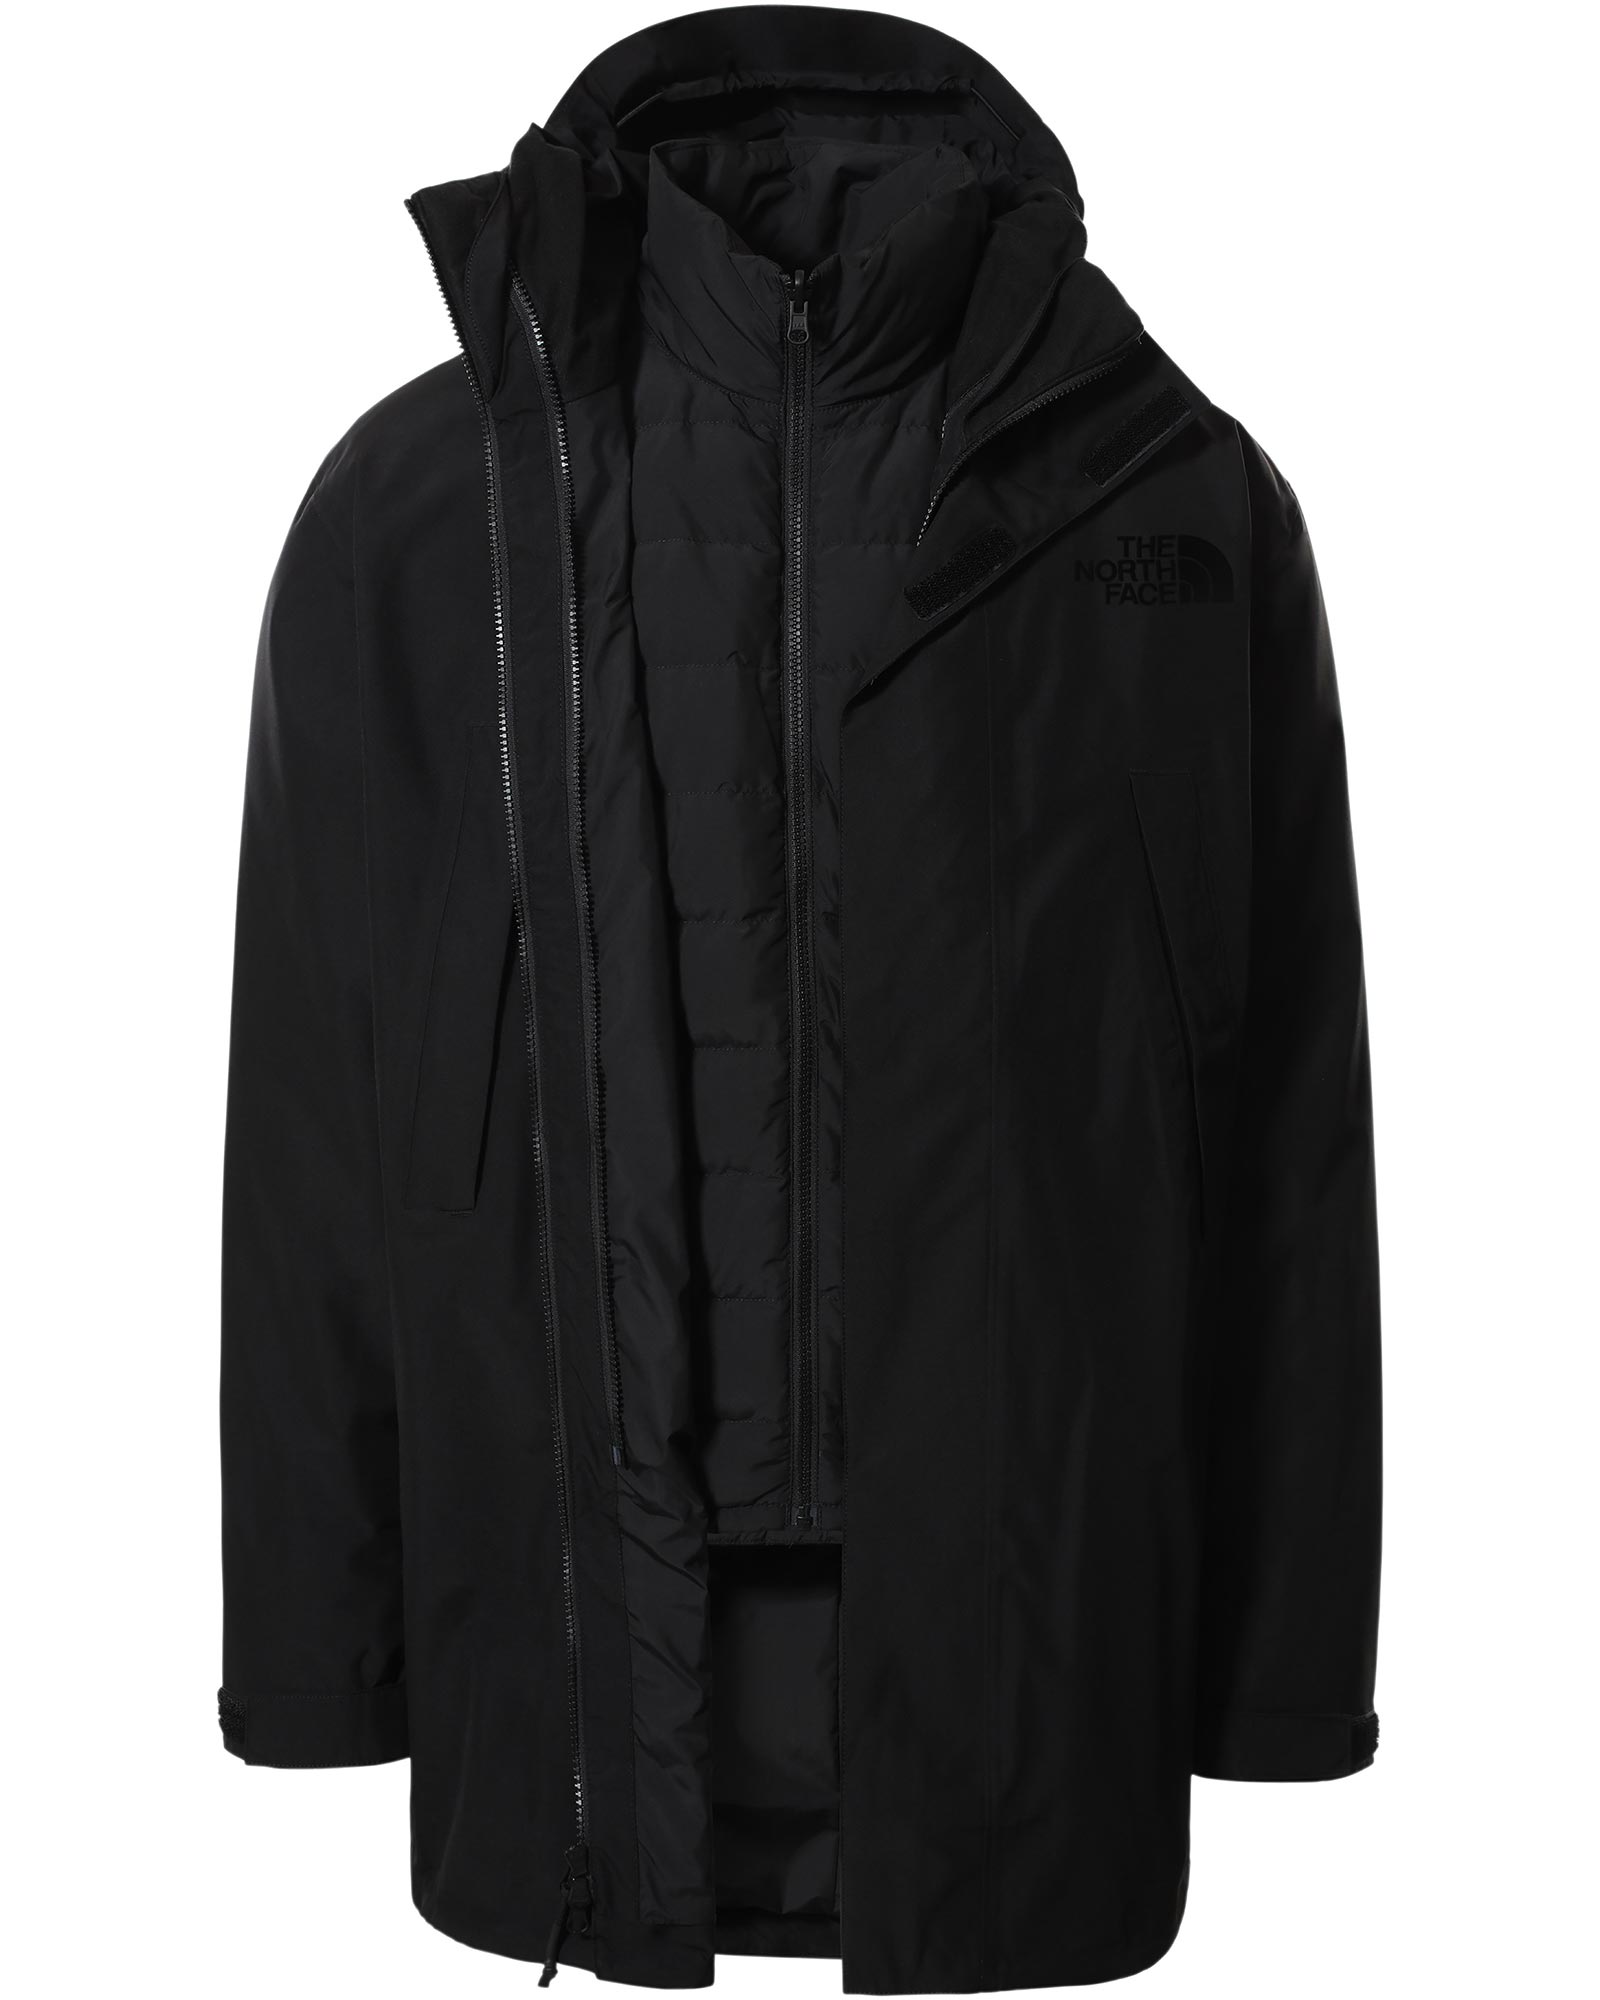 The North Face Arctic Mens Triclimate Parka Jacket